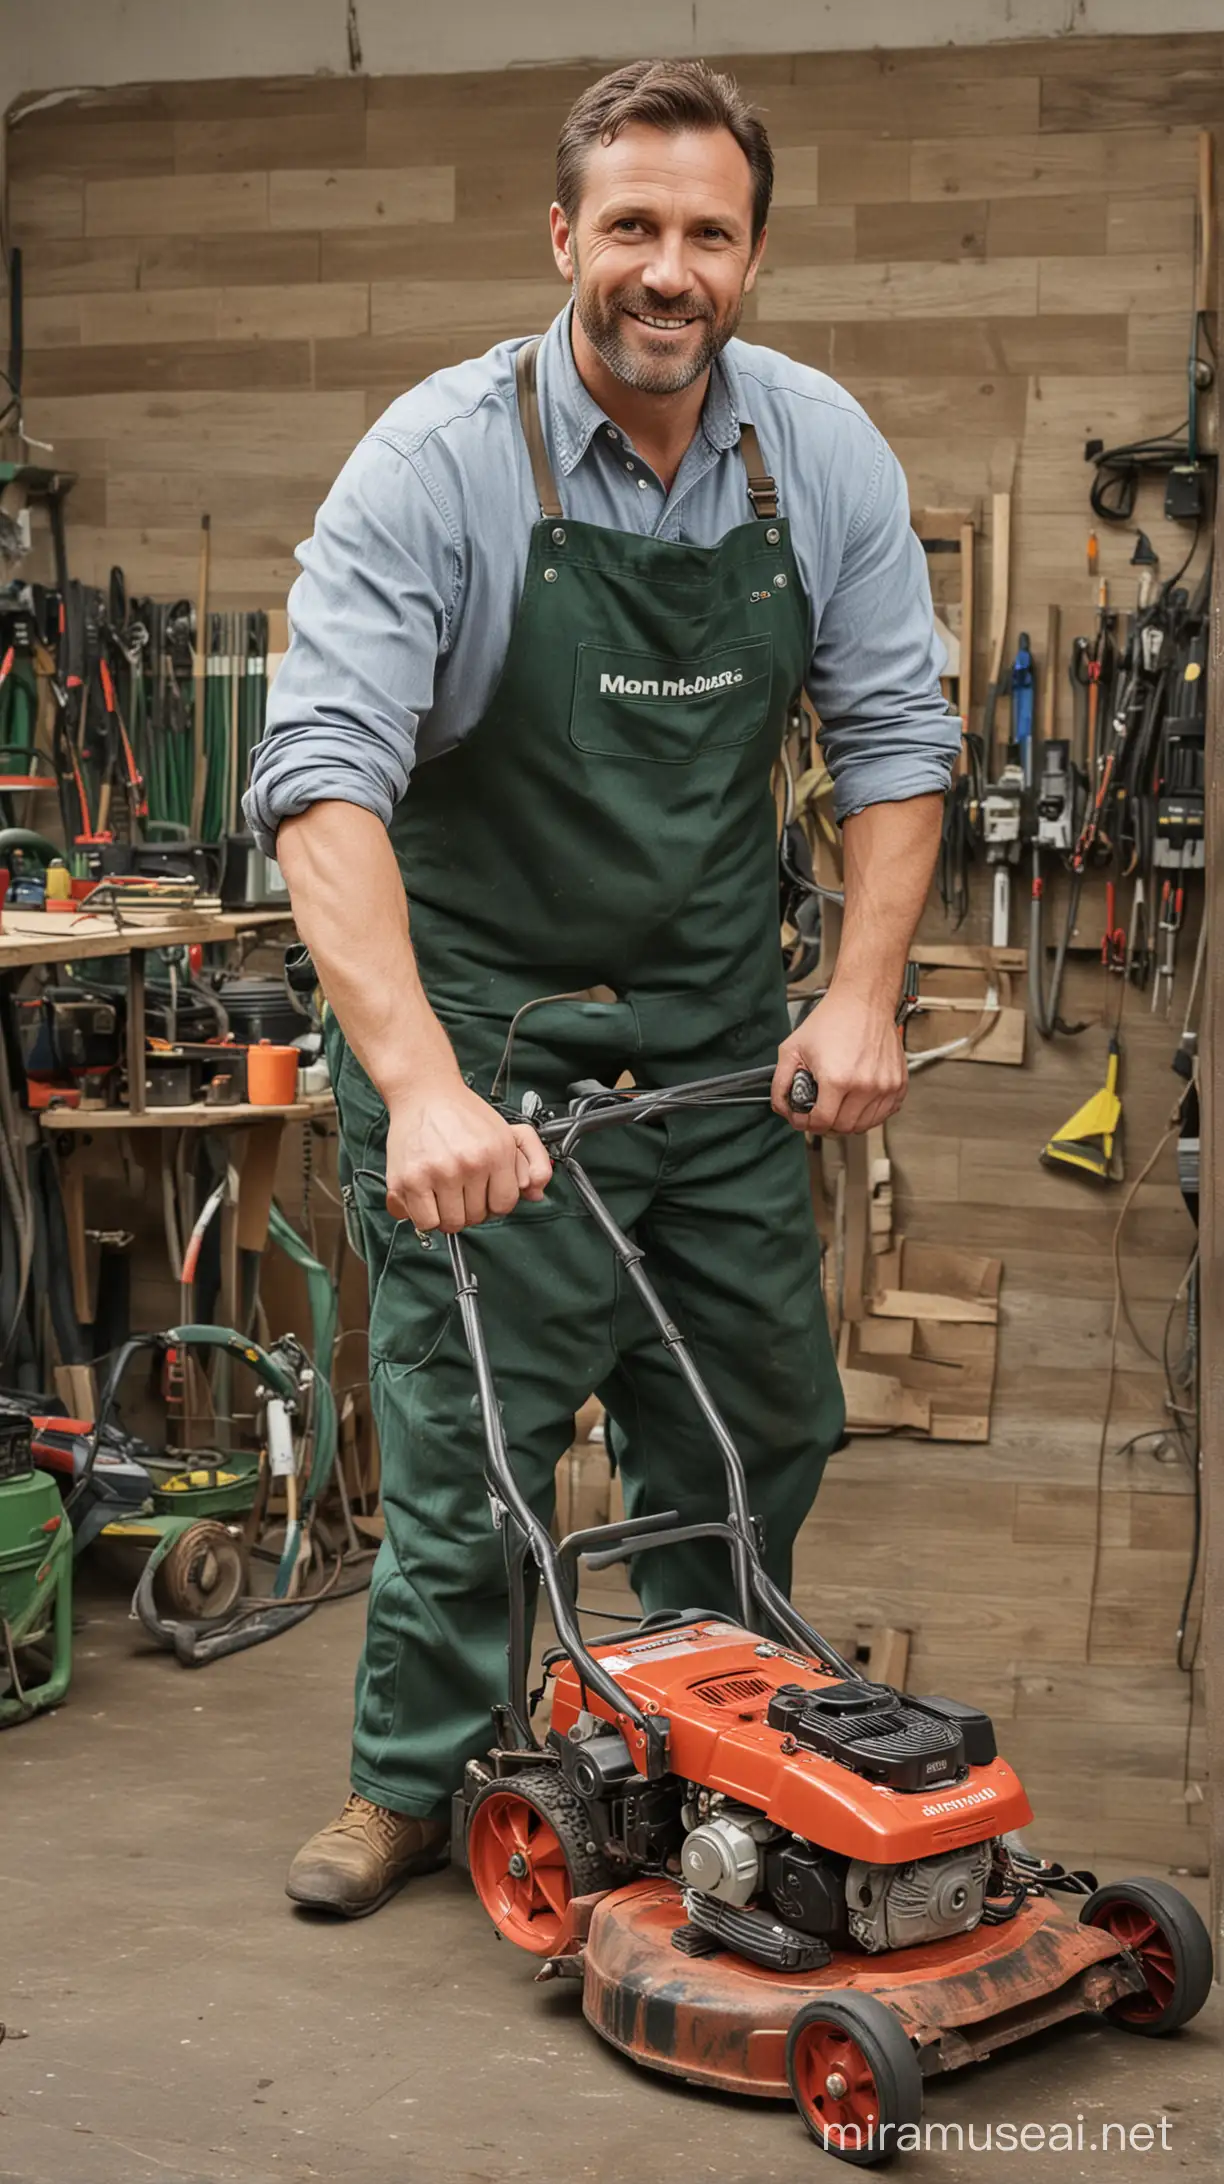 Middleaged Man Operating Lawn Mowers in Workshop